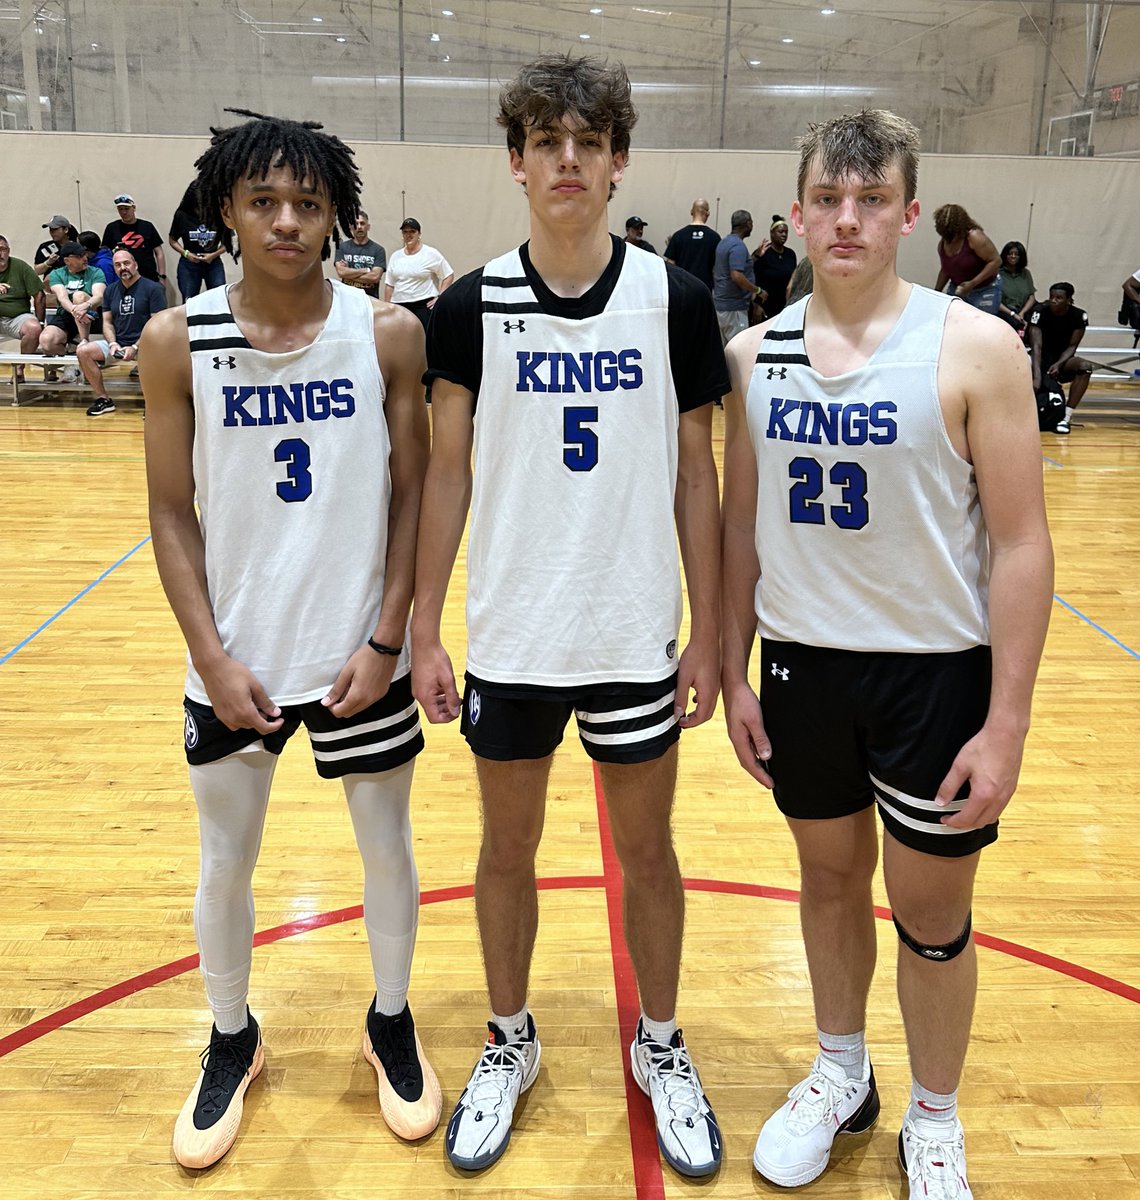 #3 Marlon Grigsby, #5 Jack Rhinehart & #23 Caleb Drummer lead Reach Higher Kings to a 56-45 win over Mpire Elite MHC 2027. All 3 players made a major impact in the game whether it was scoring or creating offense for teammates. Grigsby chipped in 17 with Drummer finishing with a